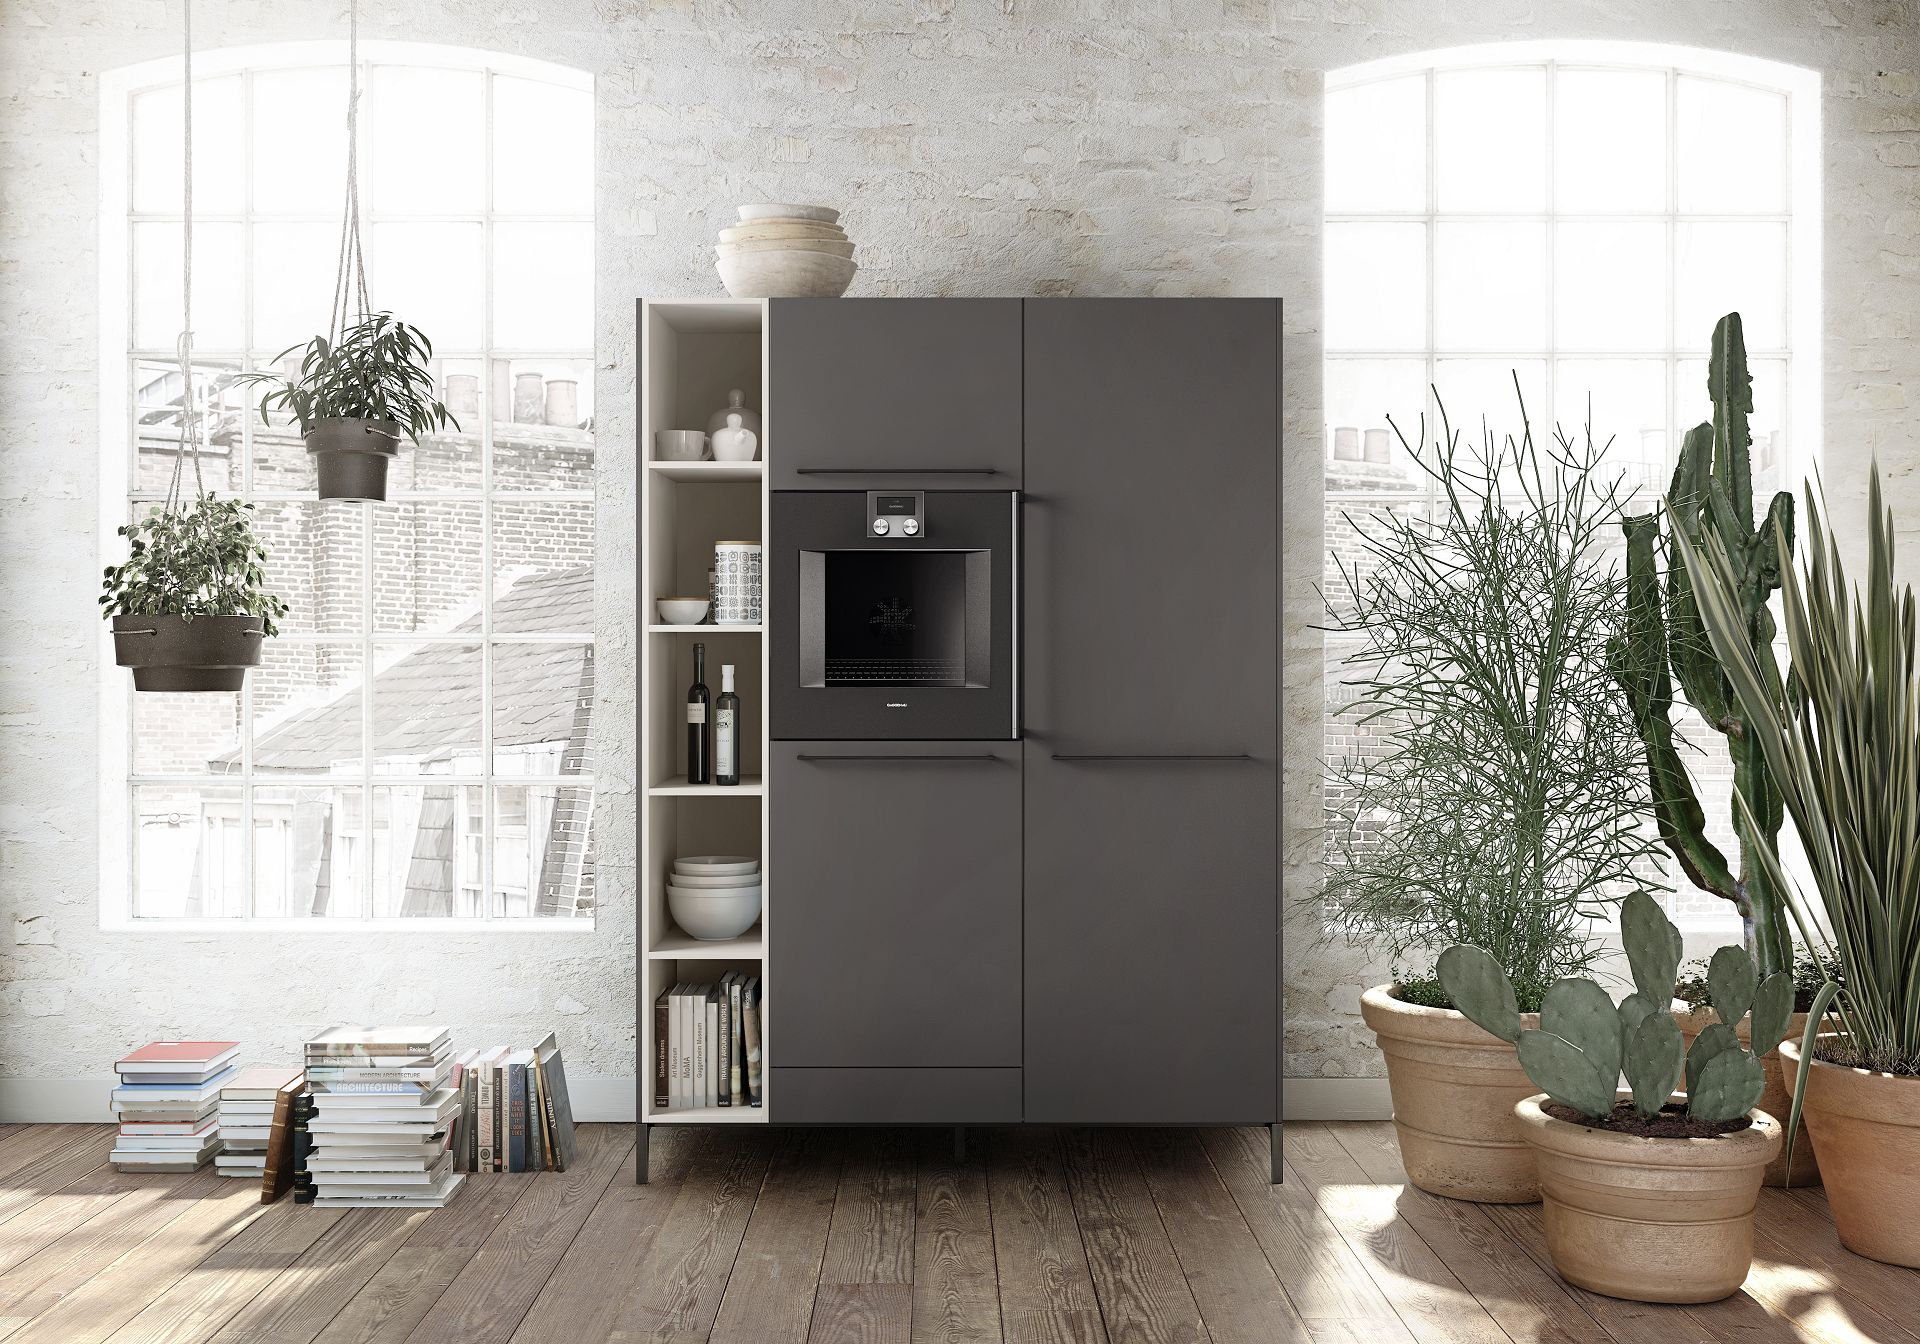 Tall cabinet ensemble with oven, fridge or dishwasher - a functional addition to the SieMatic 29